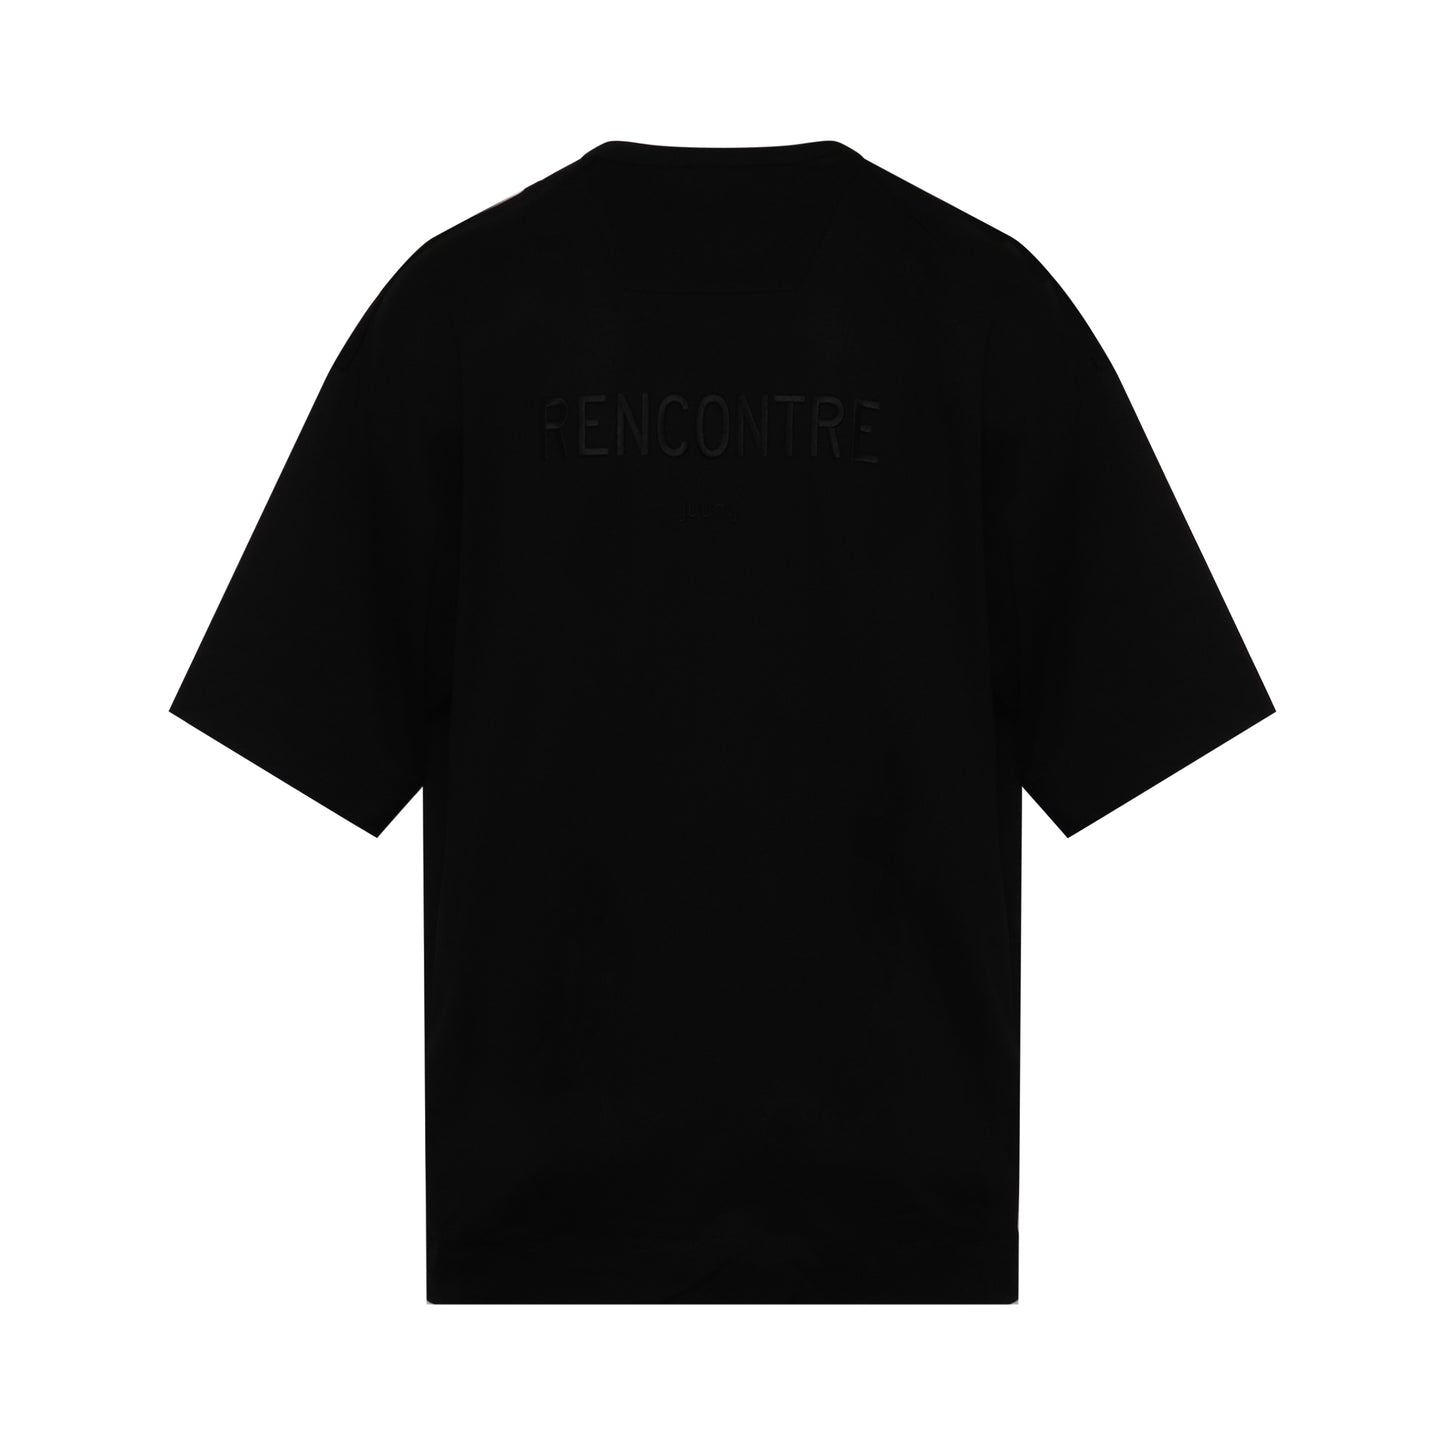 Oversize Rencontre T-Shirt in Black